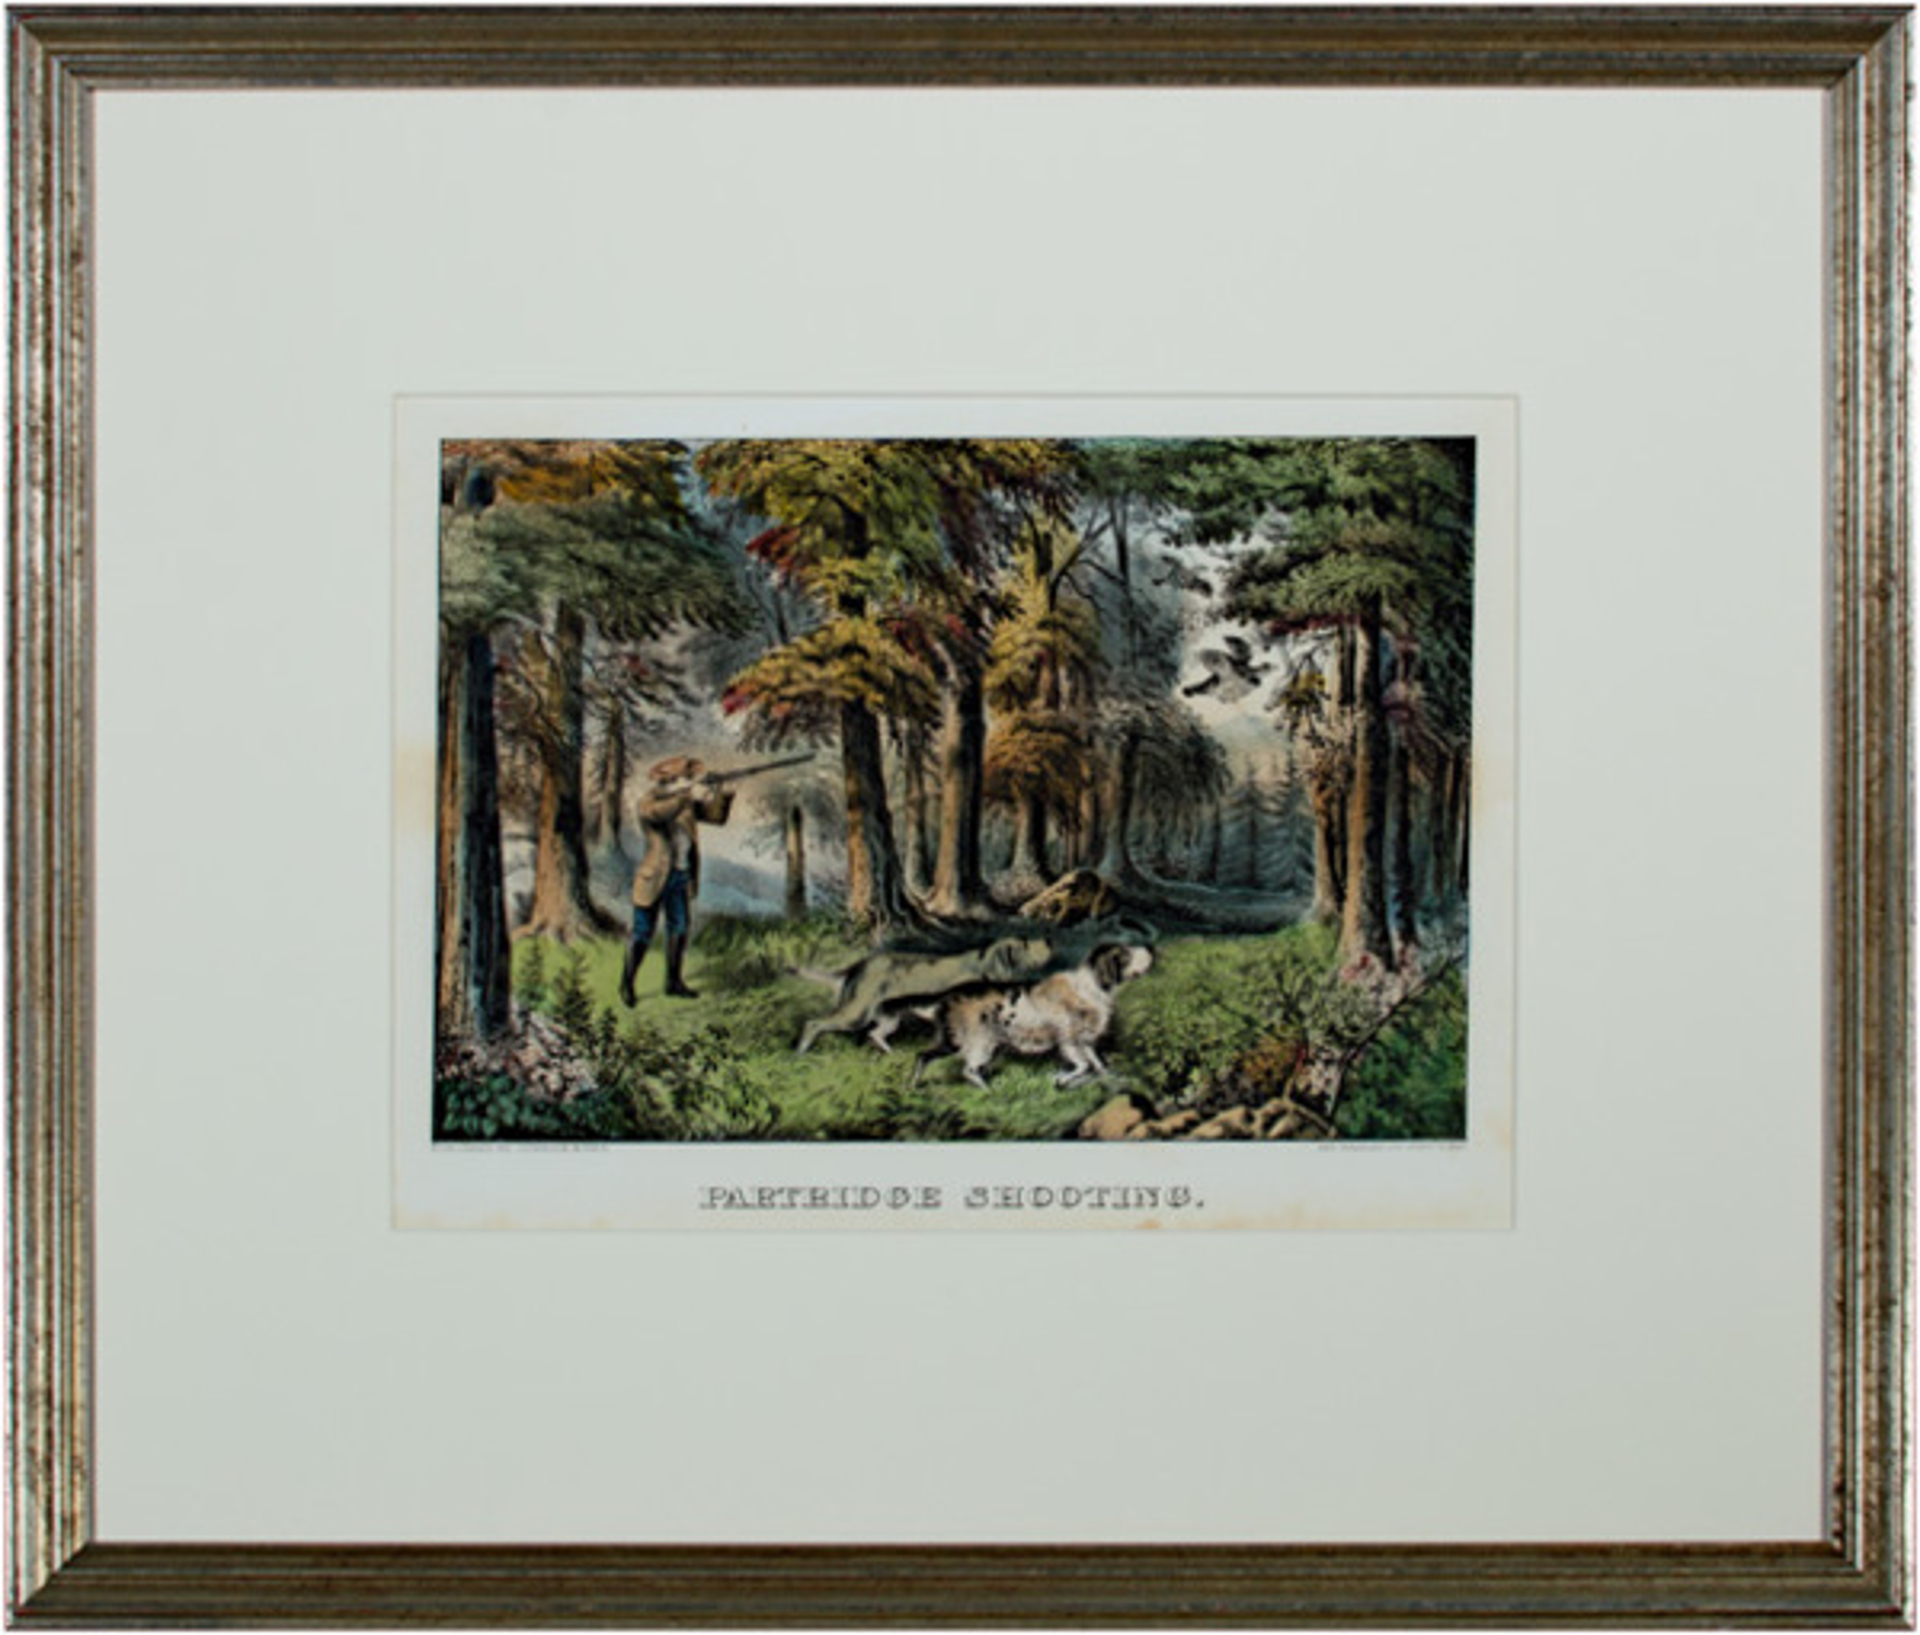 Partridge Shooting by Currier & Ives